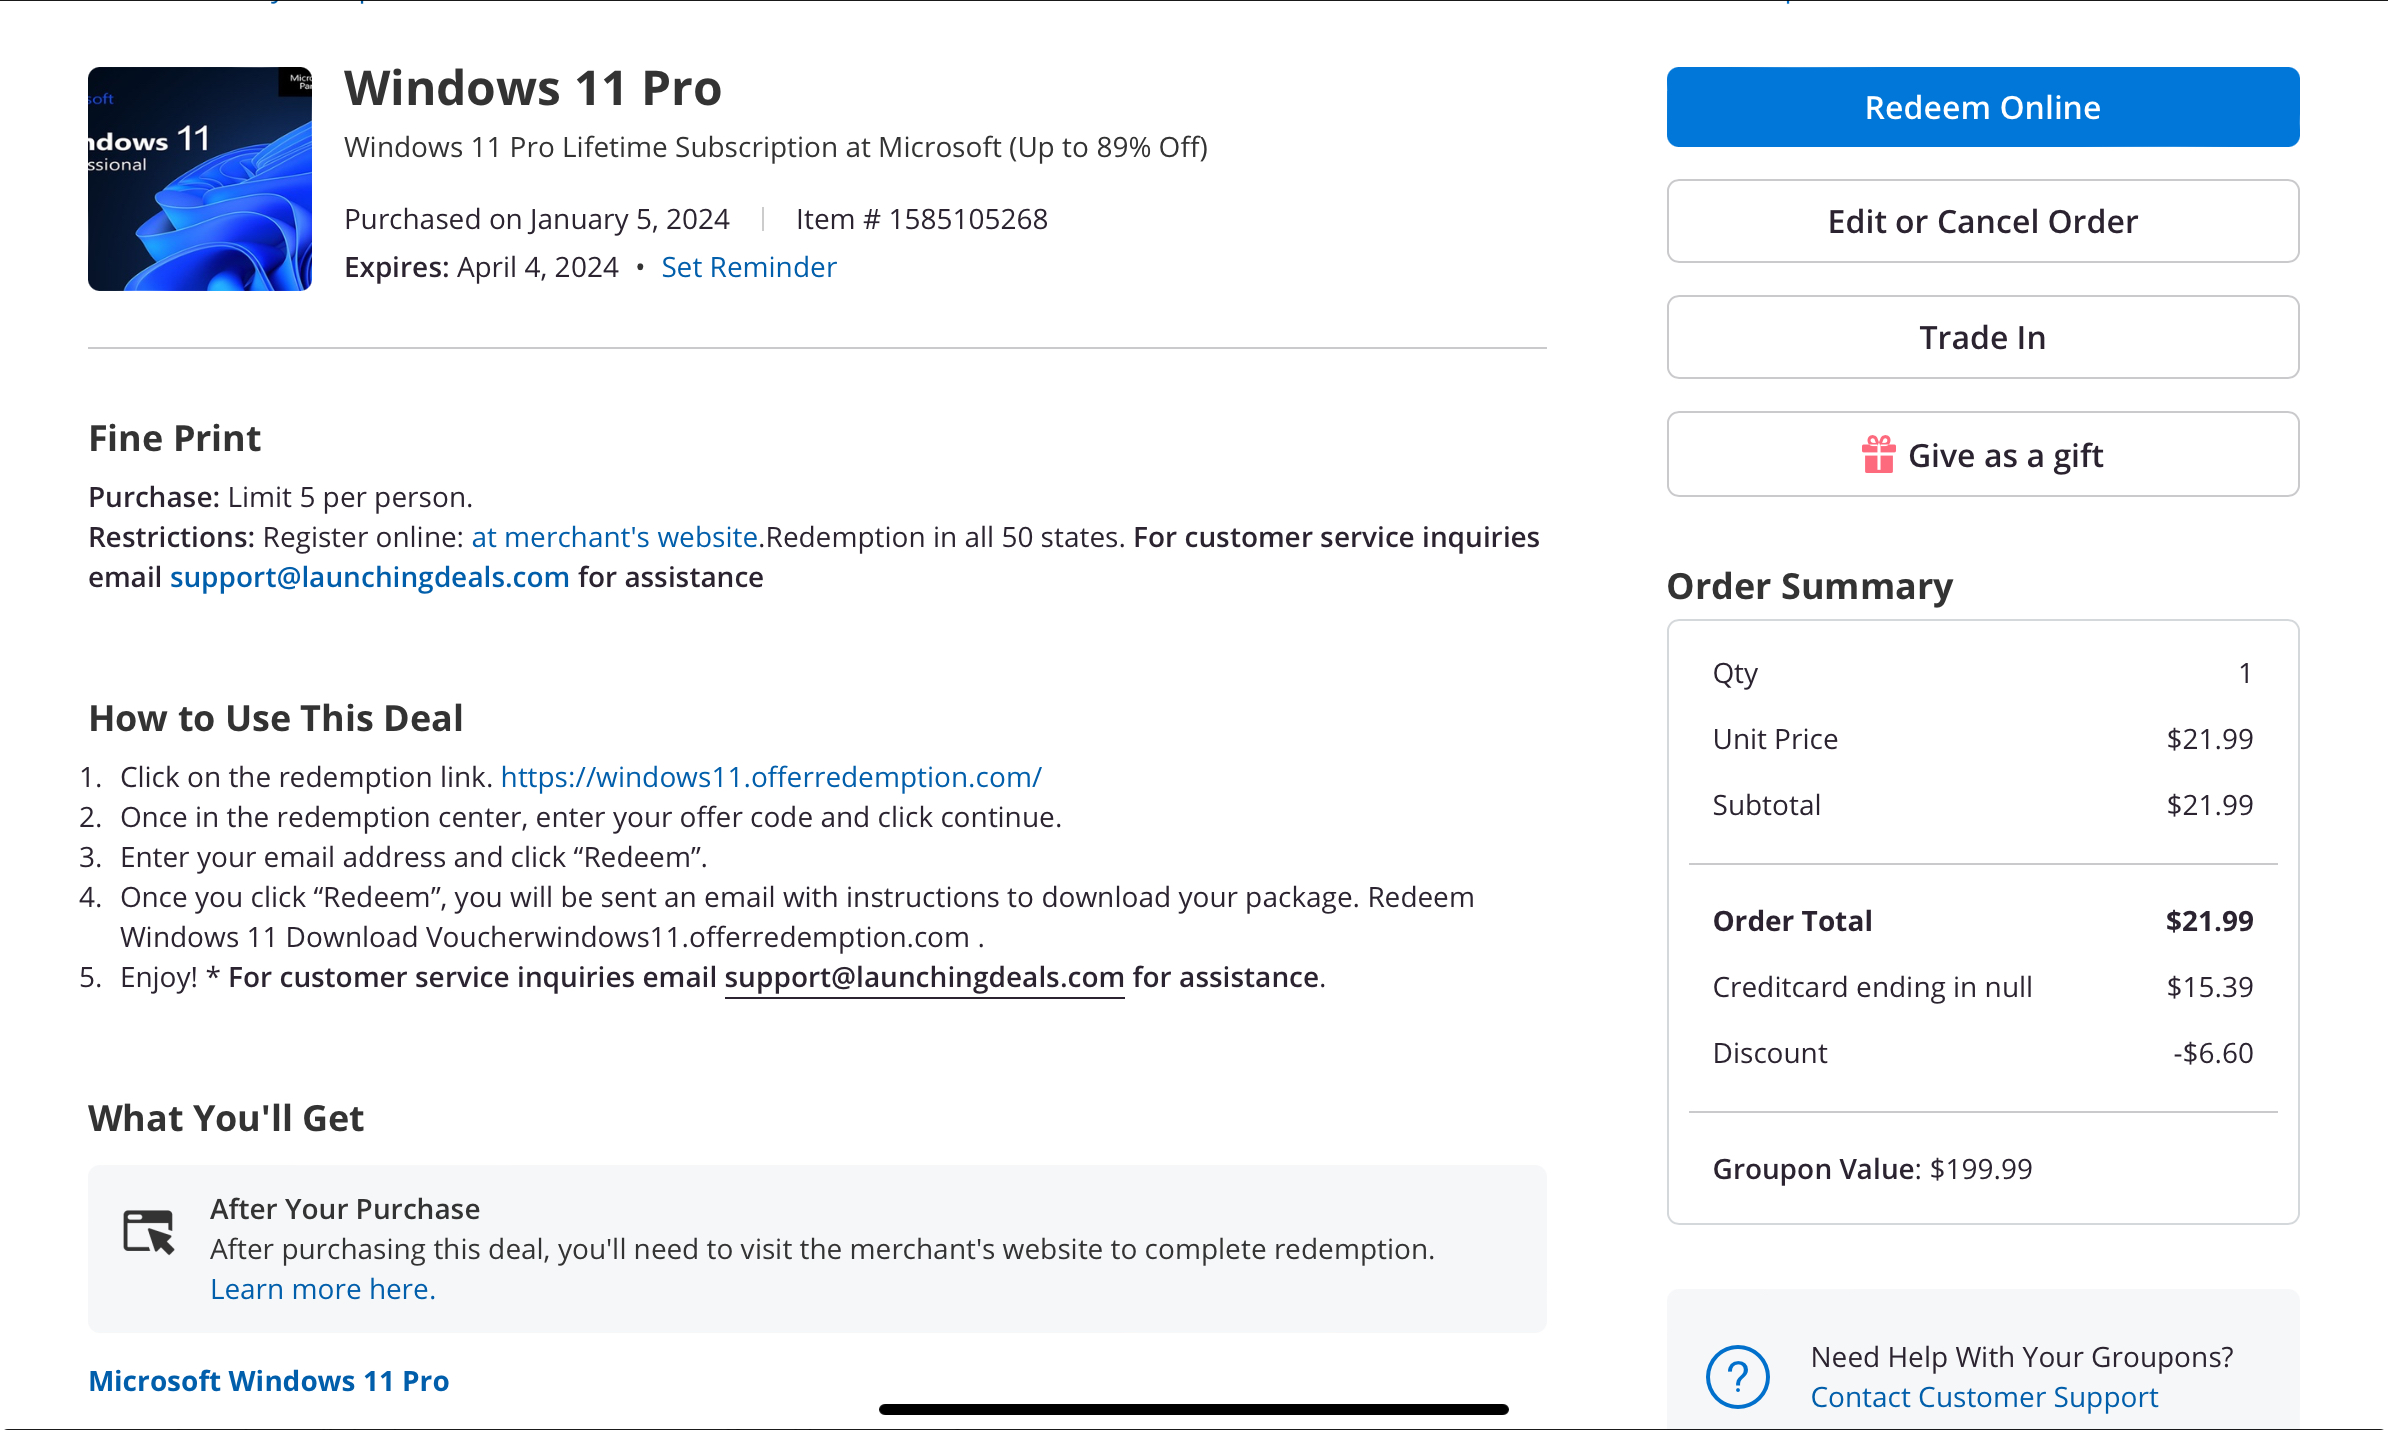 Windows 11 Pro for $15.39 on Groupon with Promo Code: MISSYOU until Jan 7.